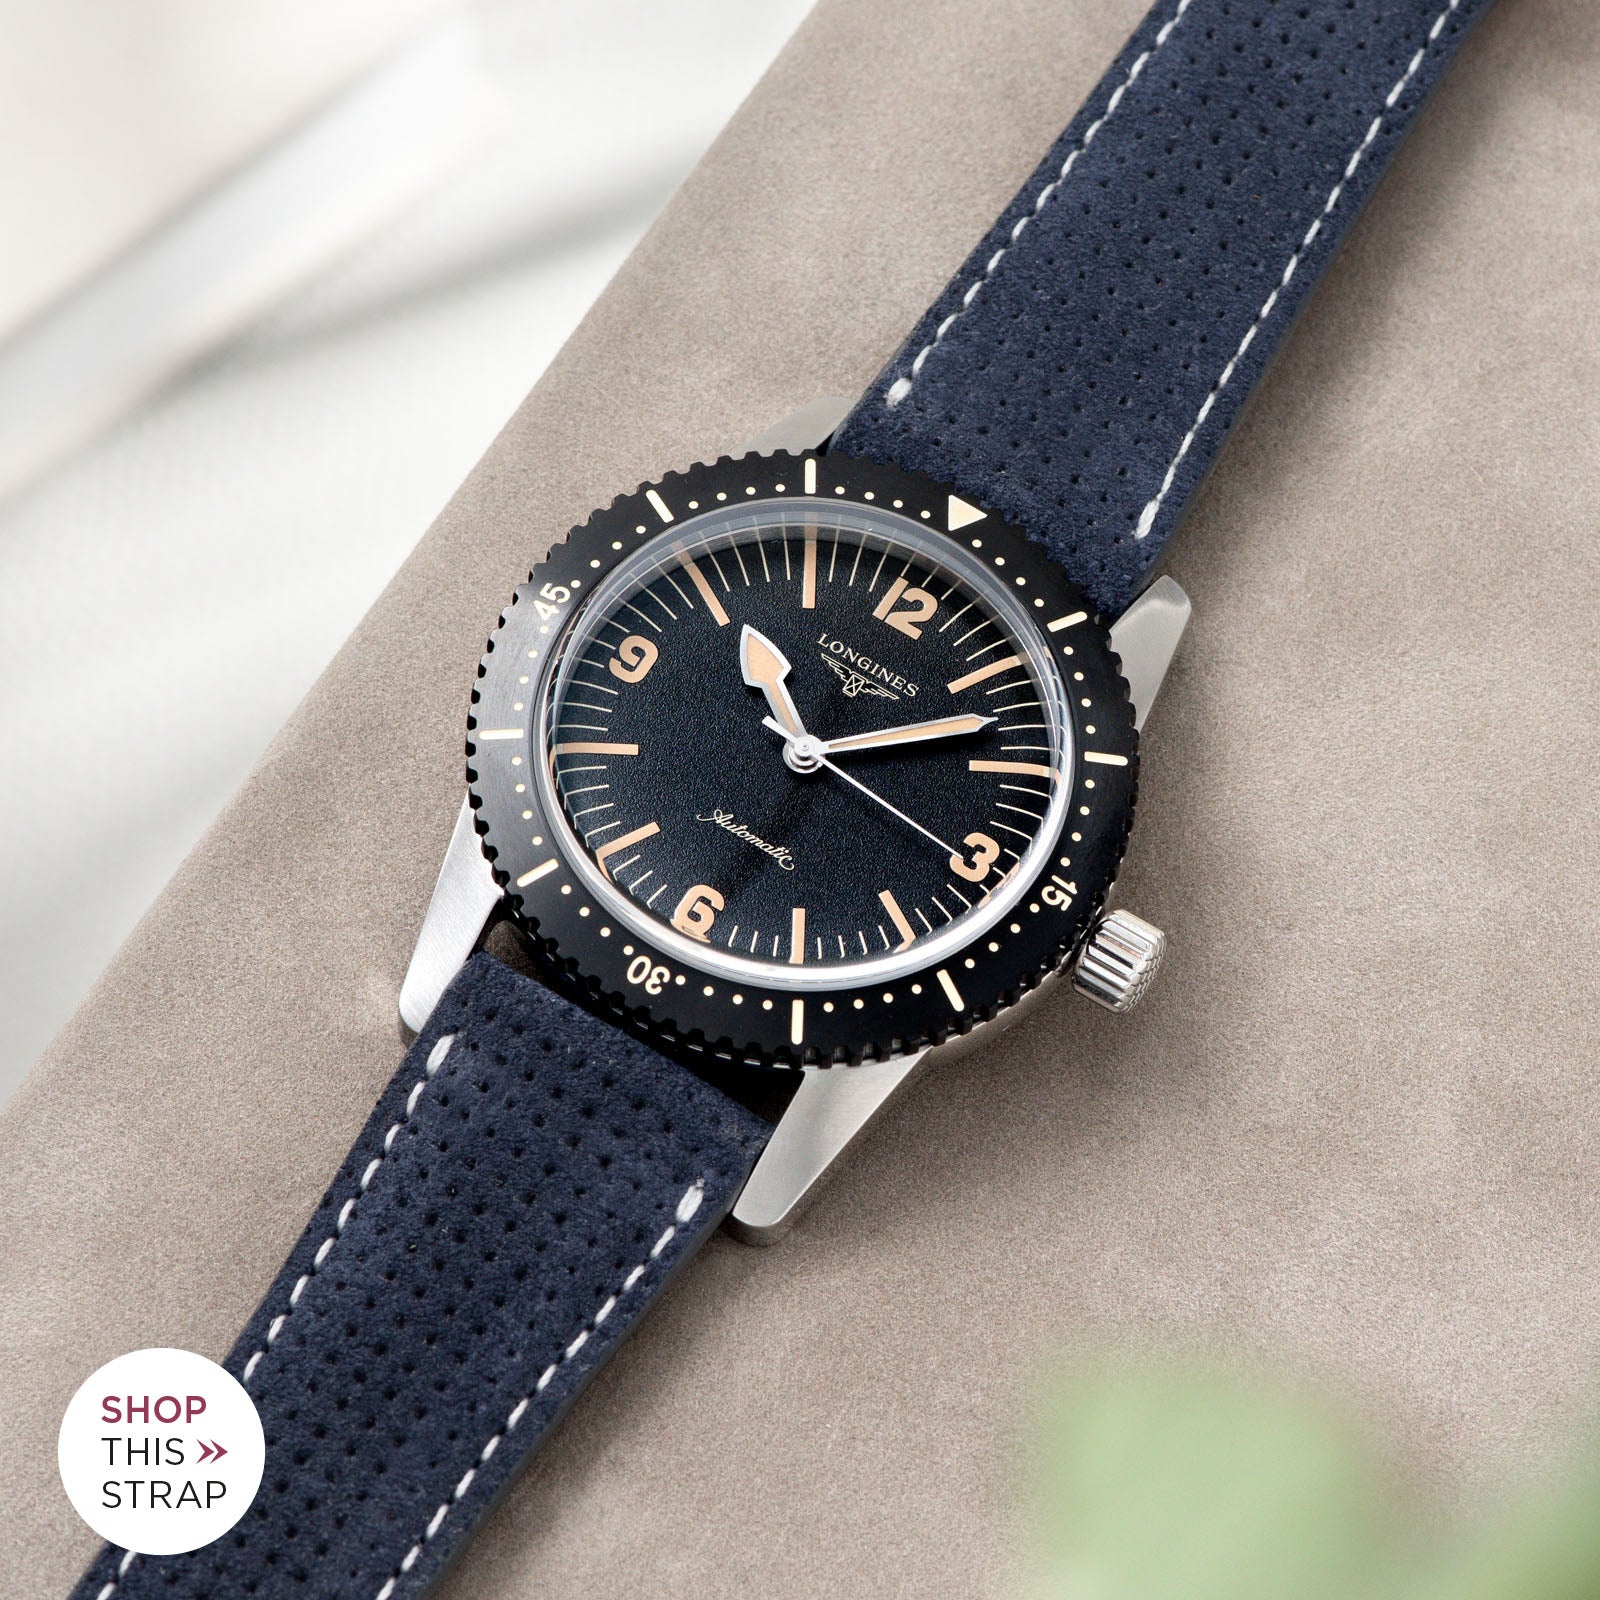 Bulang and Sons_Strap Guide_Longines Skin Diver__Punched Blue Silky Suede Leather Watch Strap